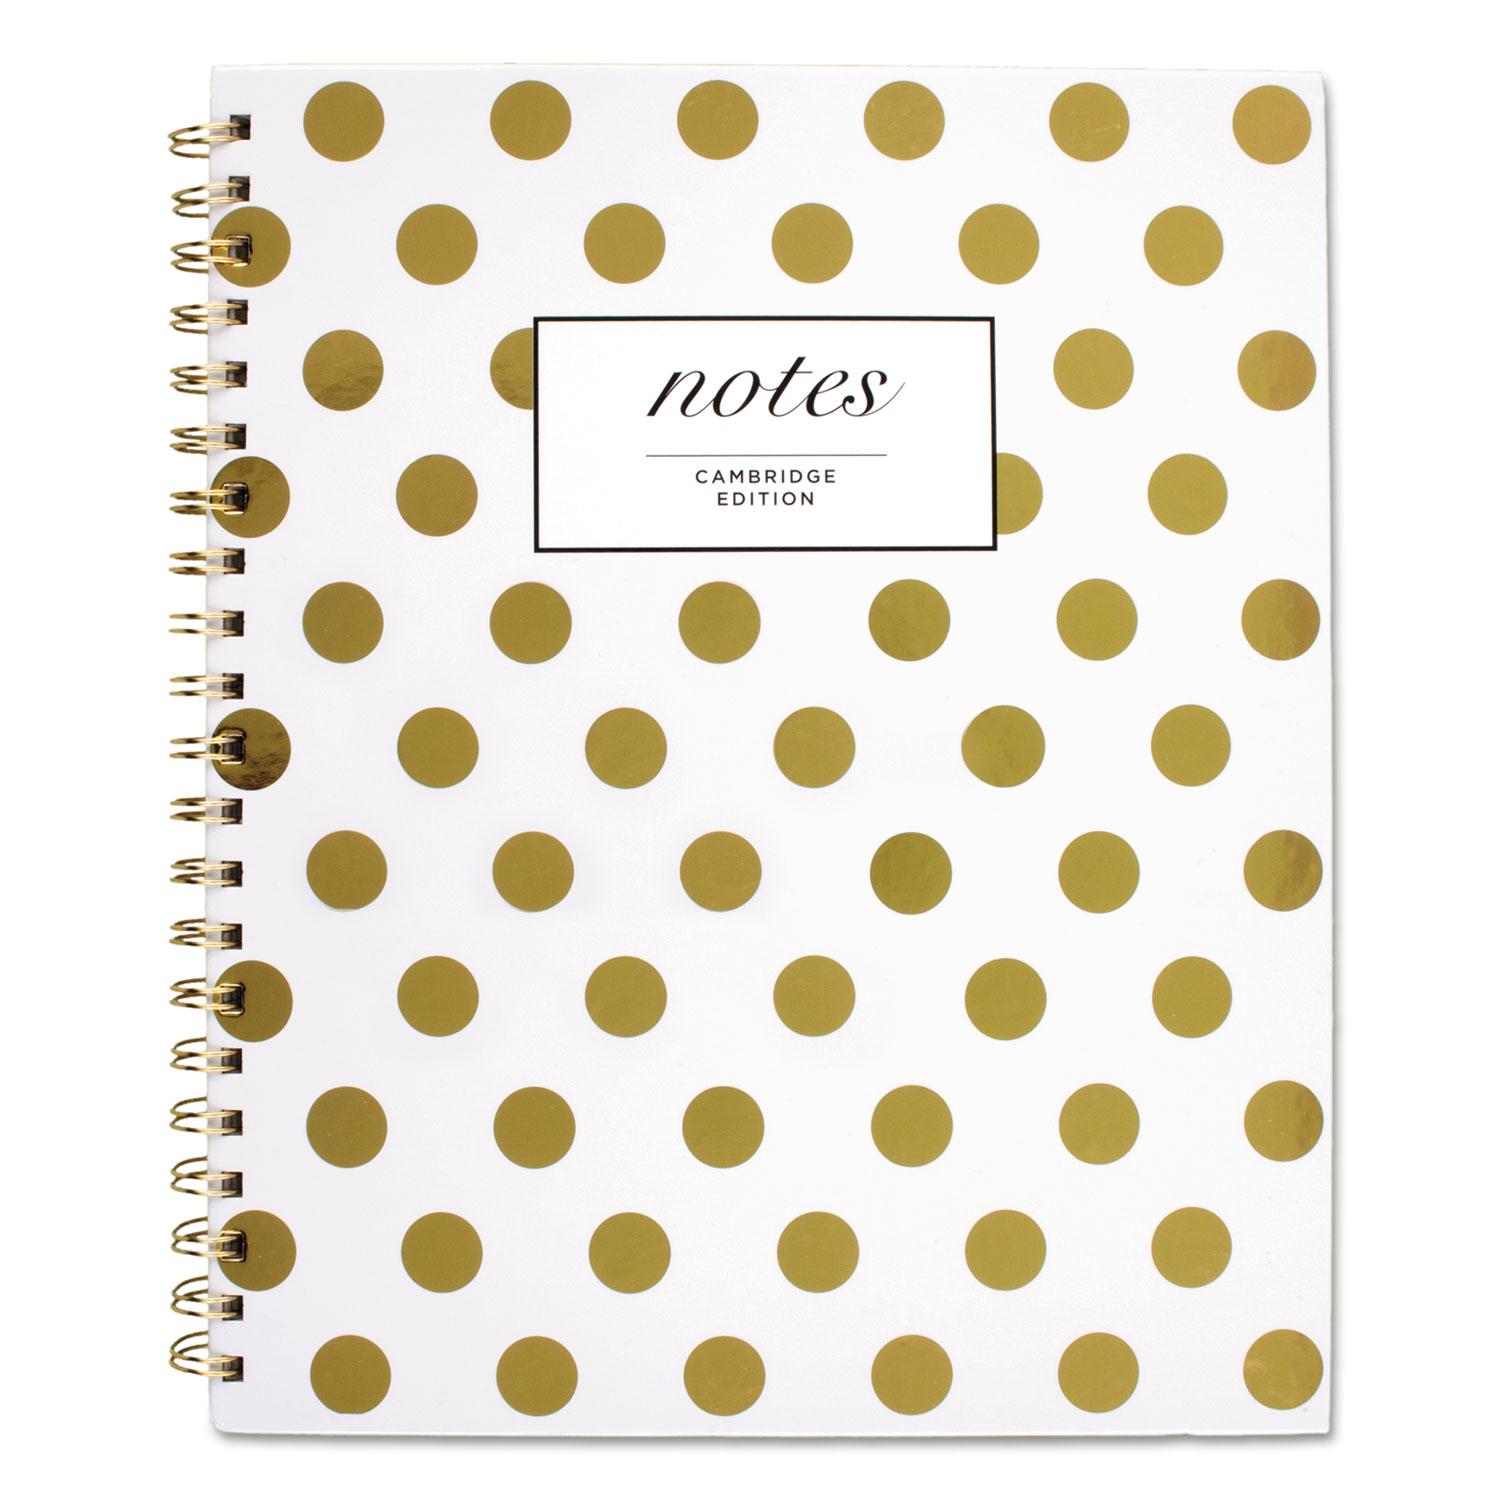  Cambridge 59014 Gold Dots Hardcover Notebook, 1 Subject, Wide/Legal Rule, White/Gold Dots Cover, 11 x 8.88, 80 Sheets (MEA59014) 